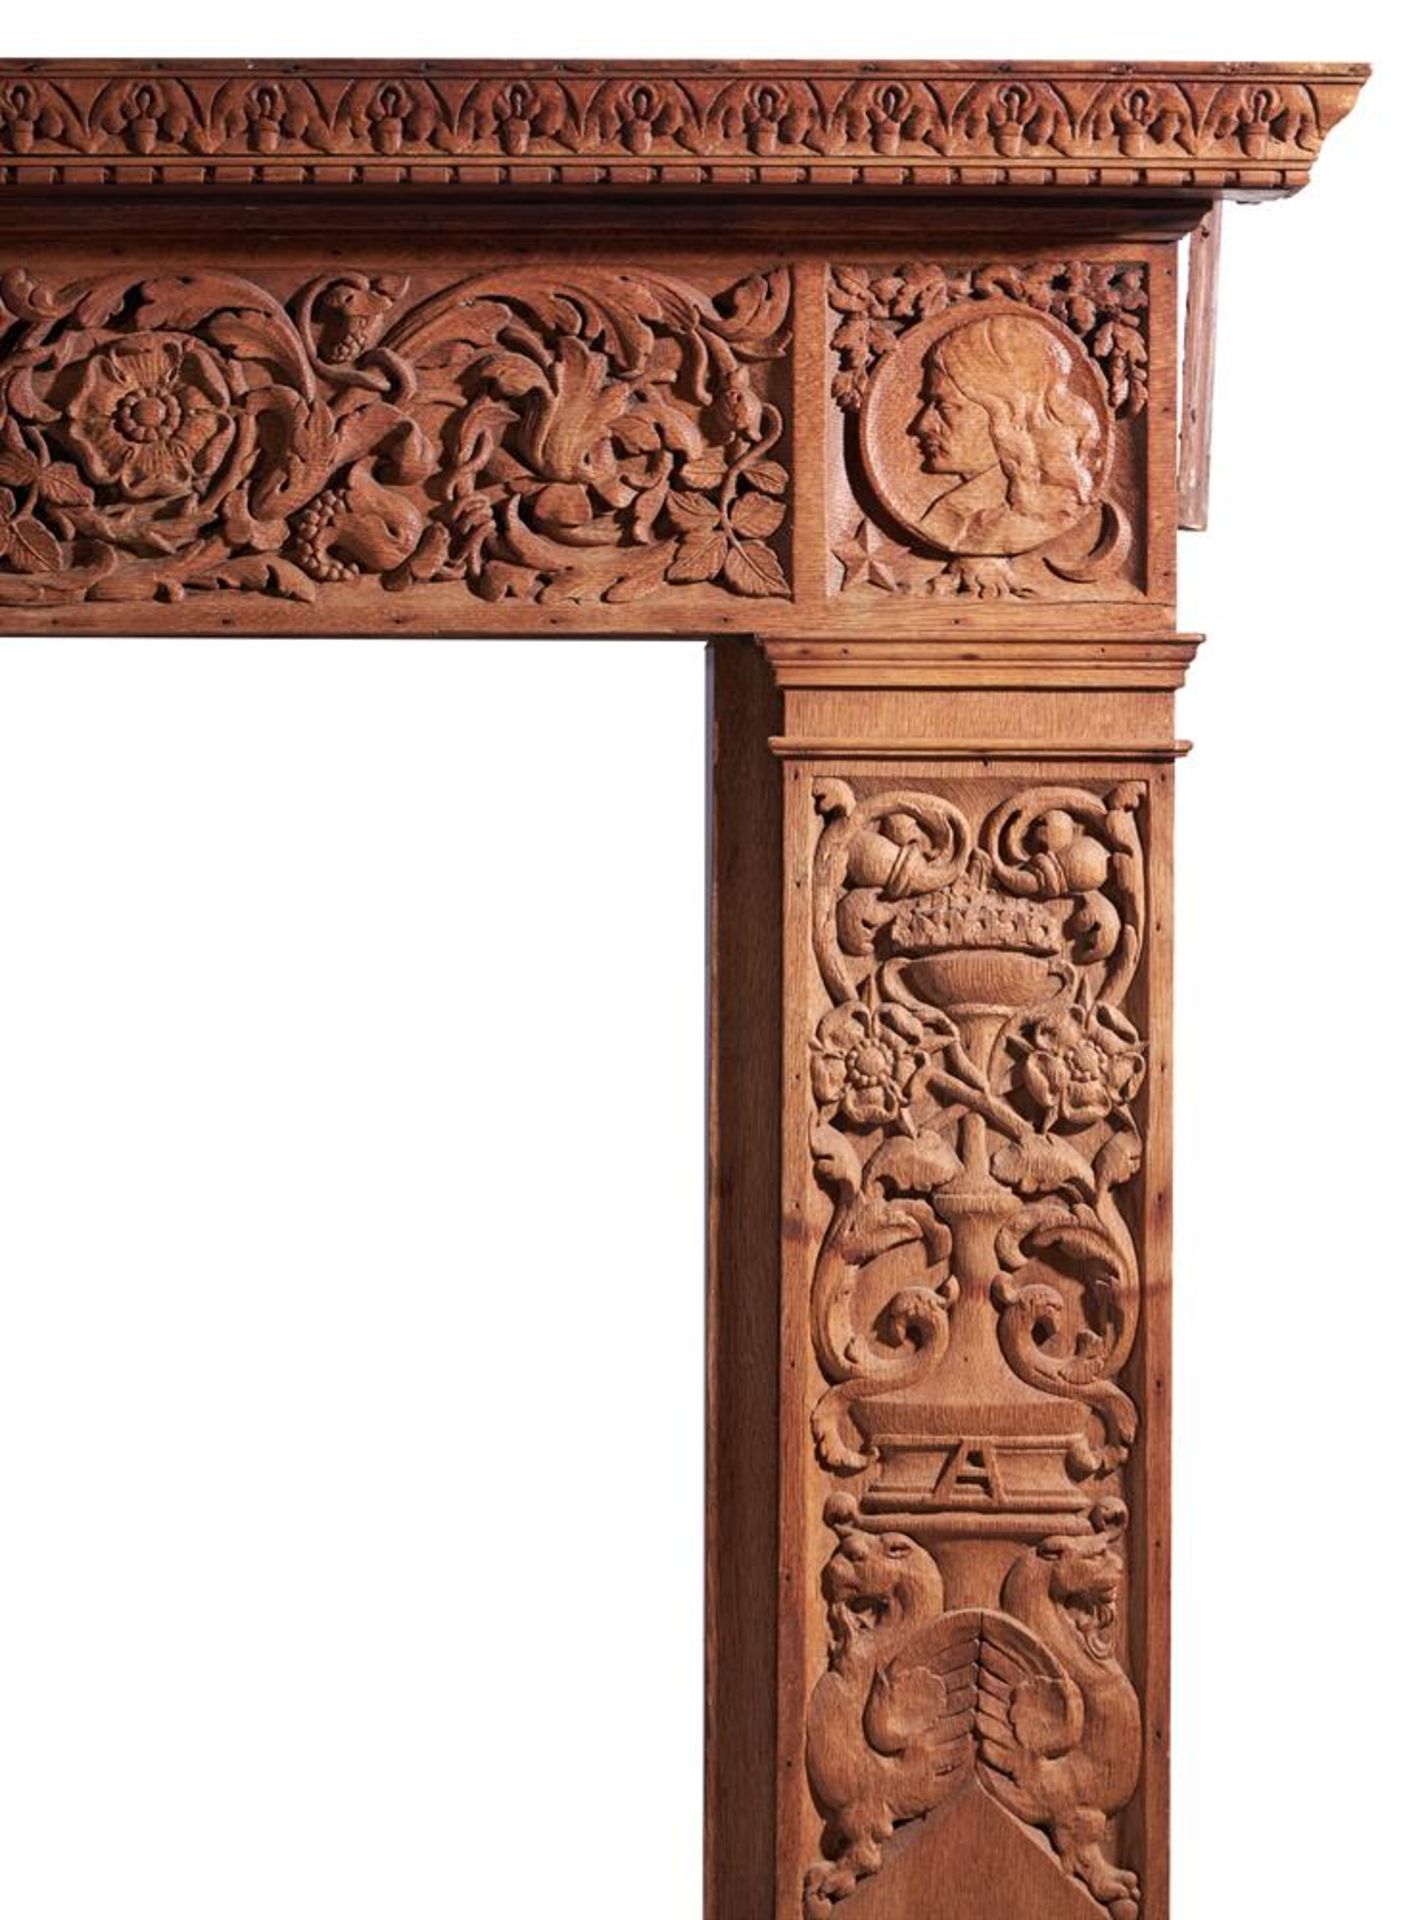 A VICTORIAN RENAISSANCE REVIVAL CARVED OAK CHIMNEYPIECE, LATE 19TH CENTURY - Image 6 of 6